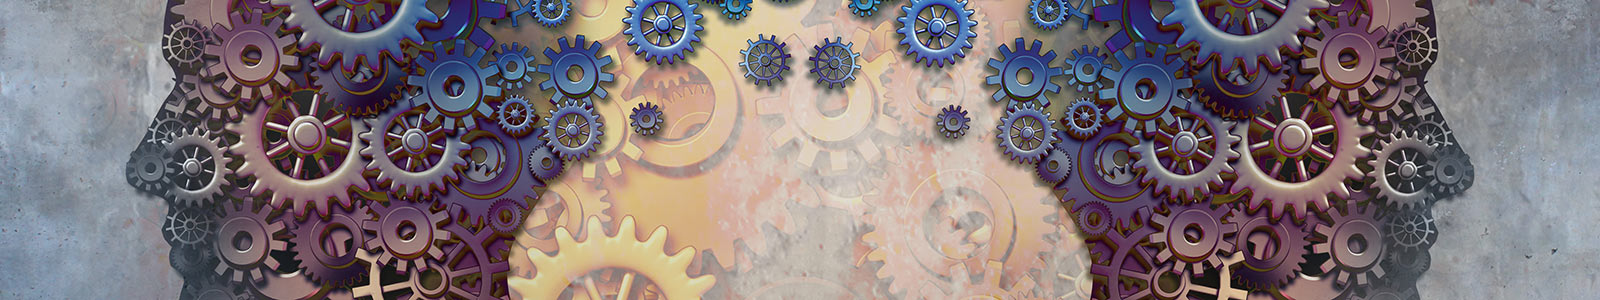 Cogs within a head 